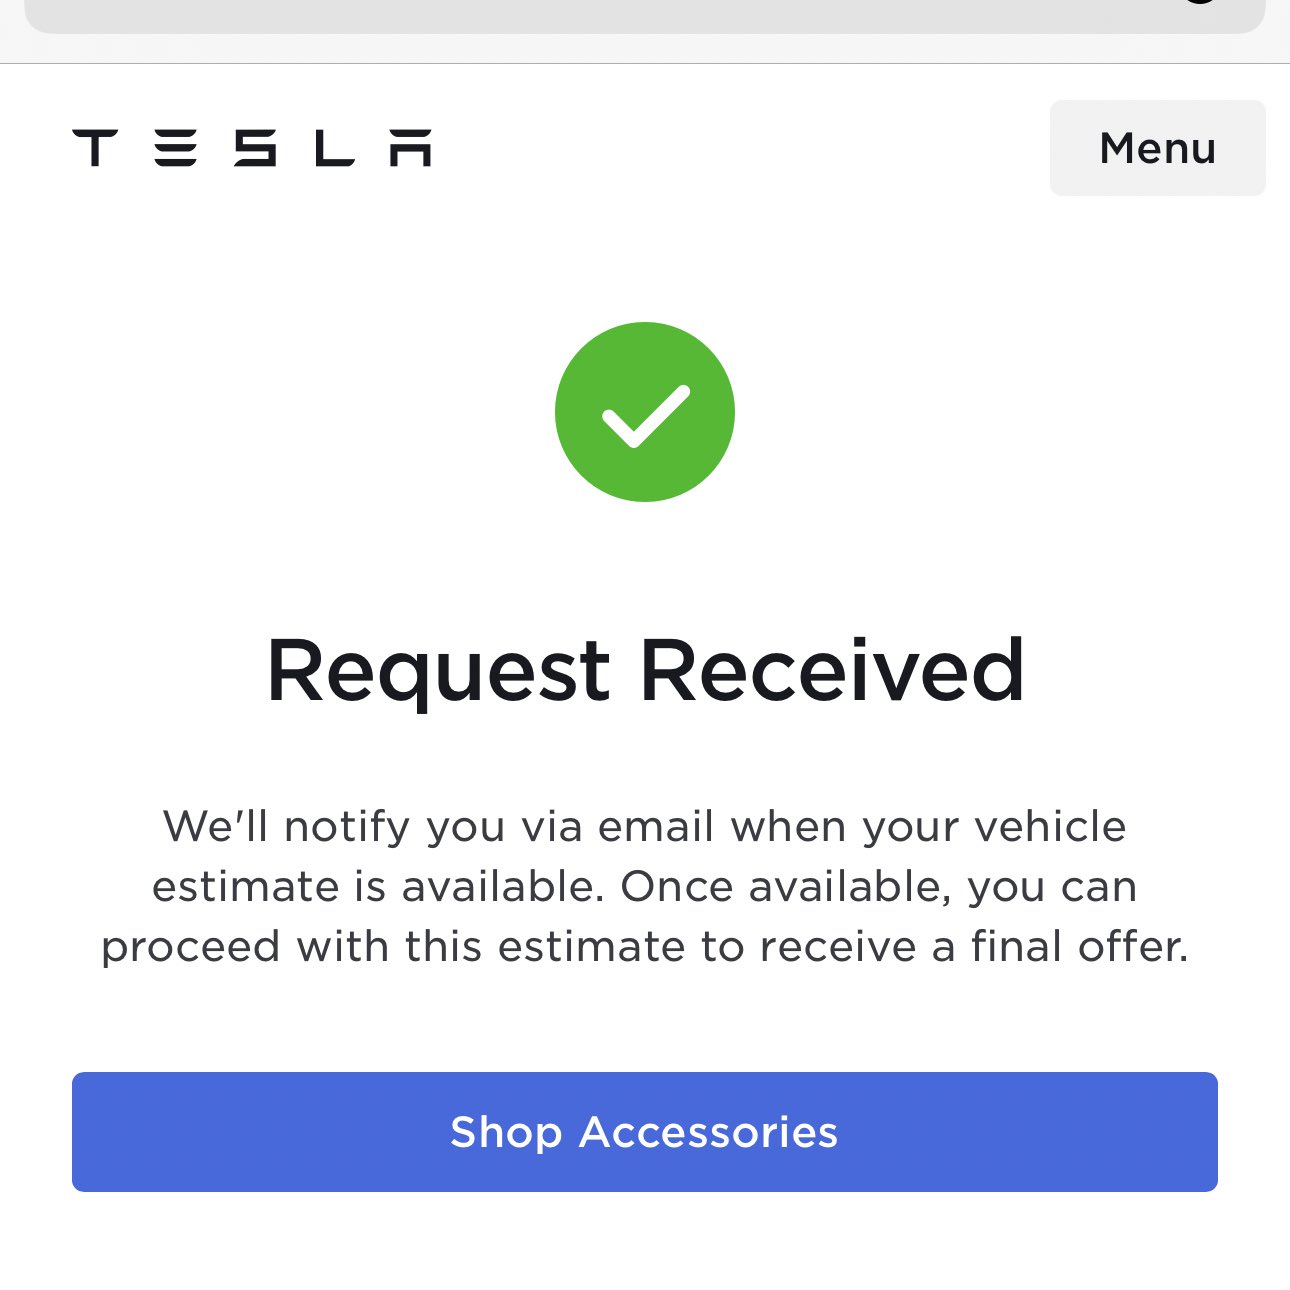 Zack på Twitter: "Anyone wanna what will offer for a Model 3 with 147k miles but FSD? No, I'm not trading it in. Just wanna see how low the offer